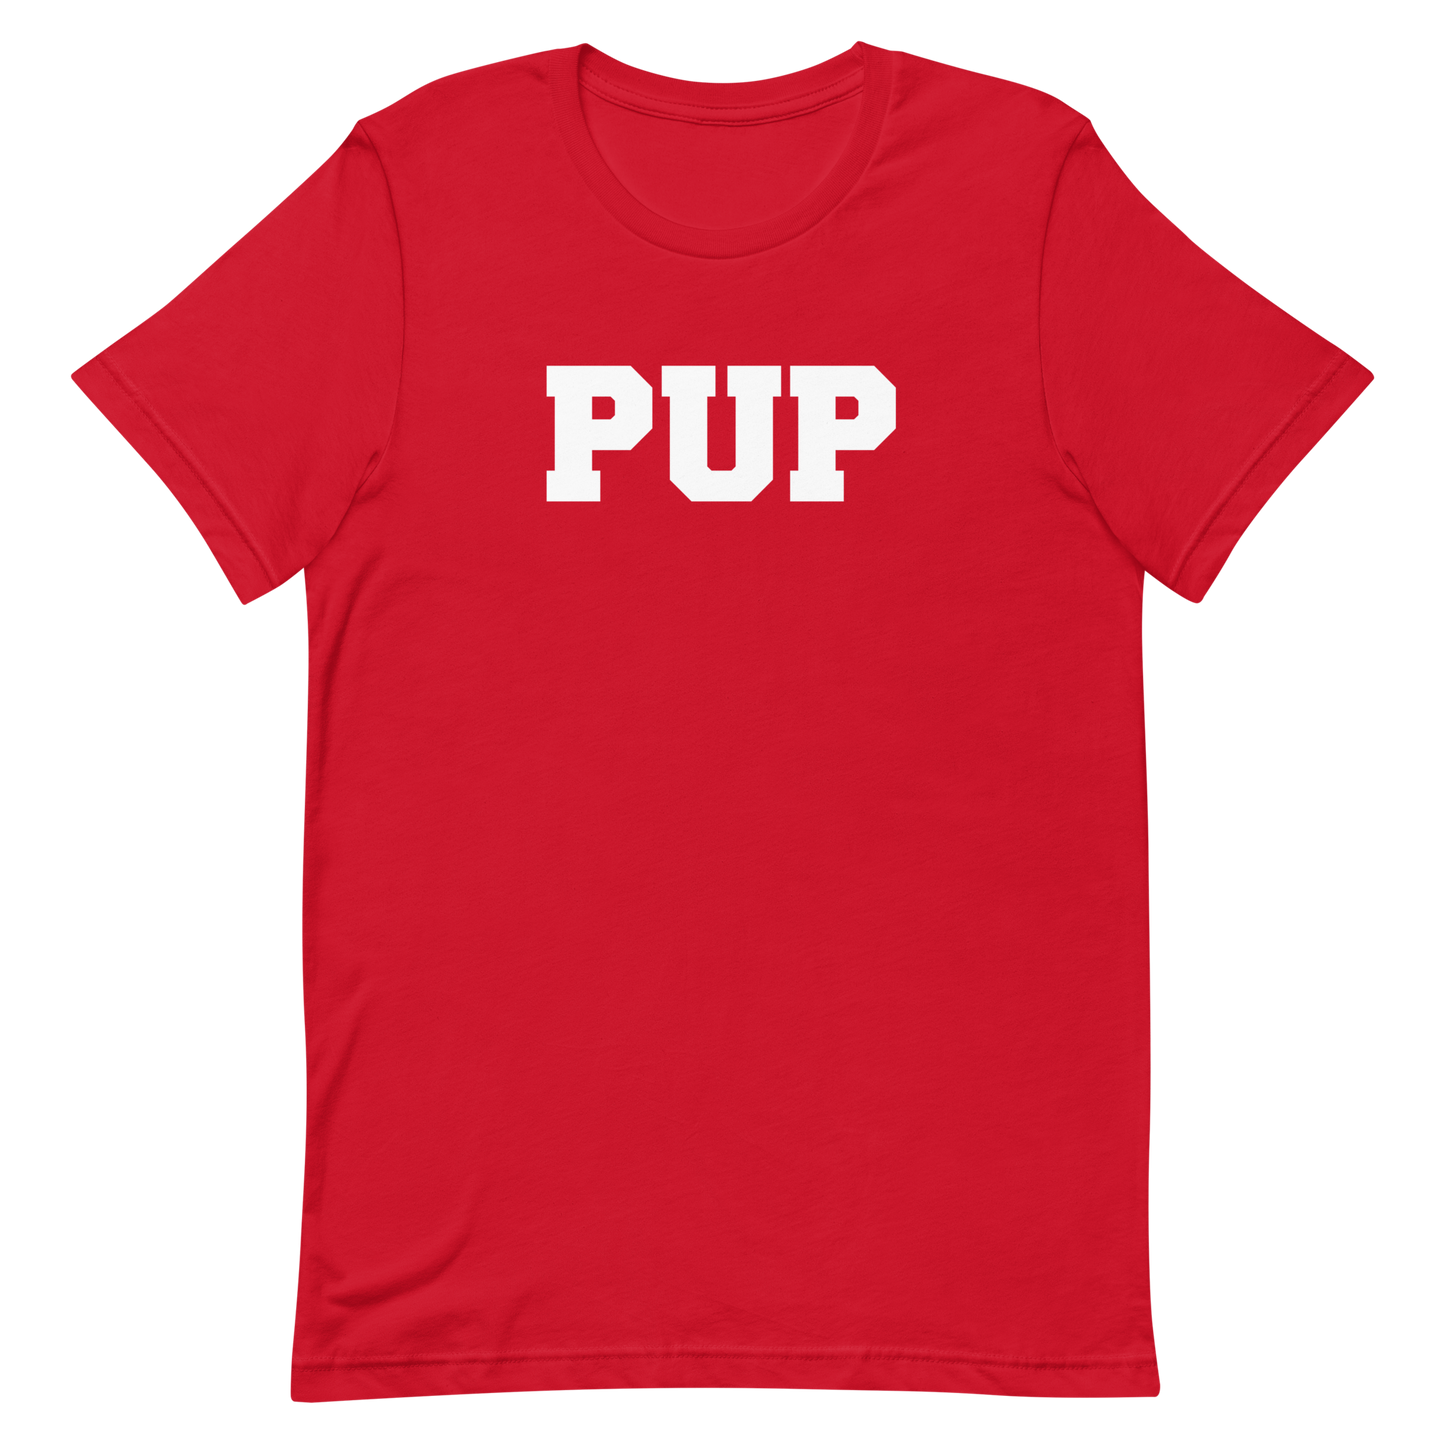 Pup T-Shirt - Red